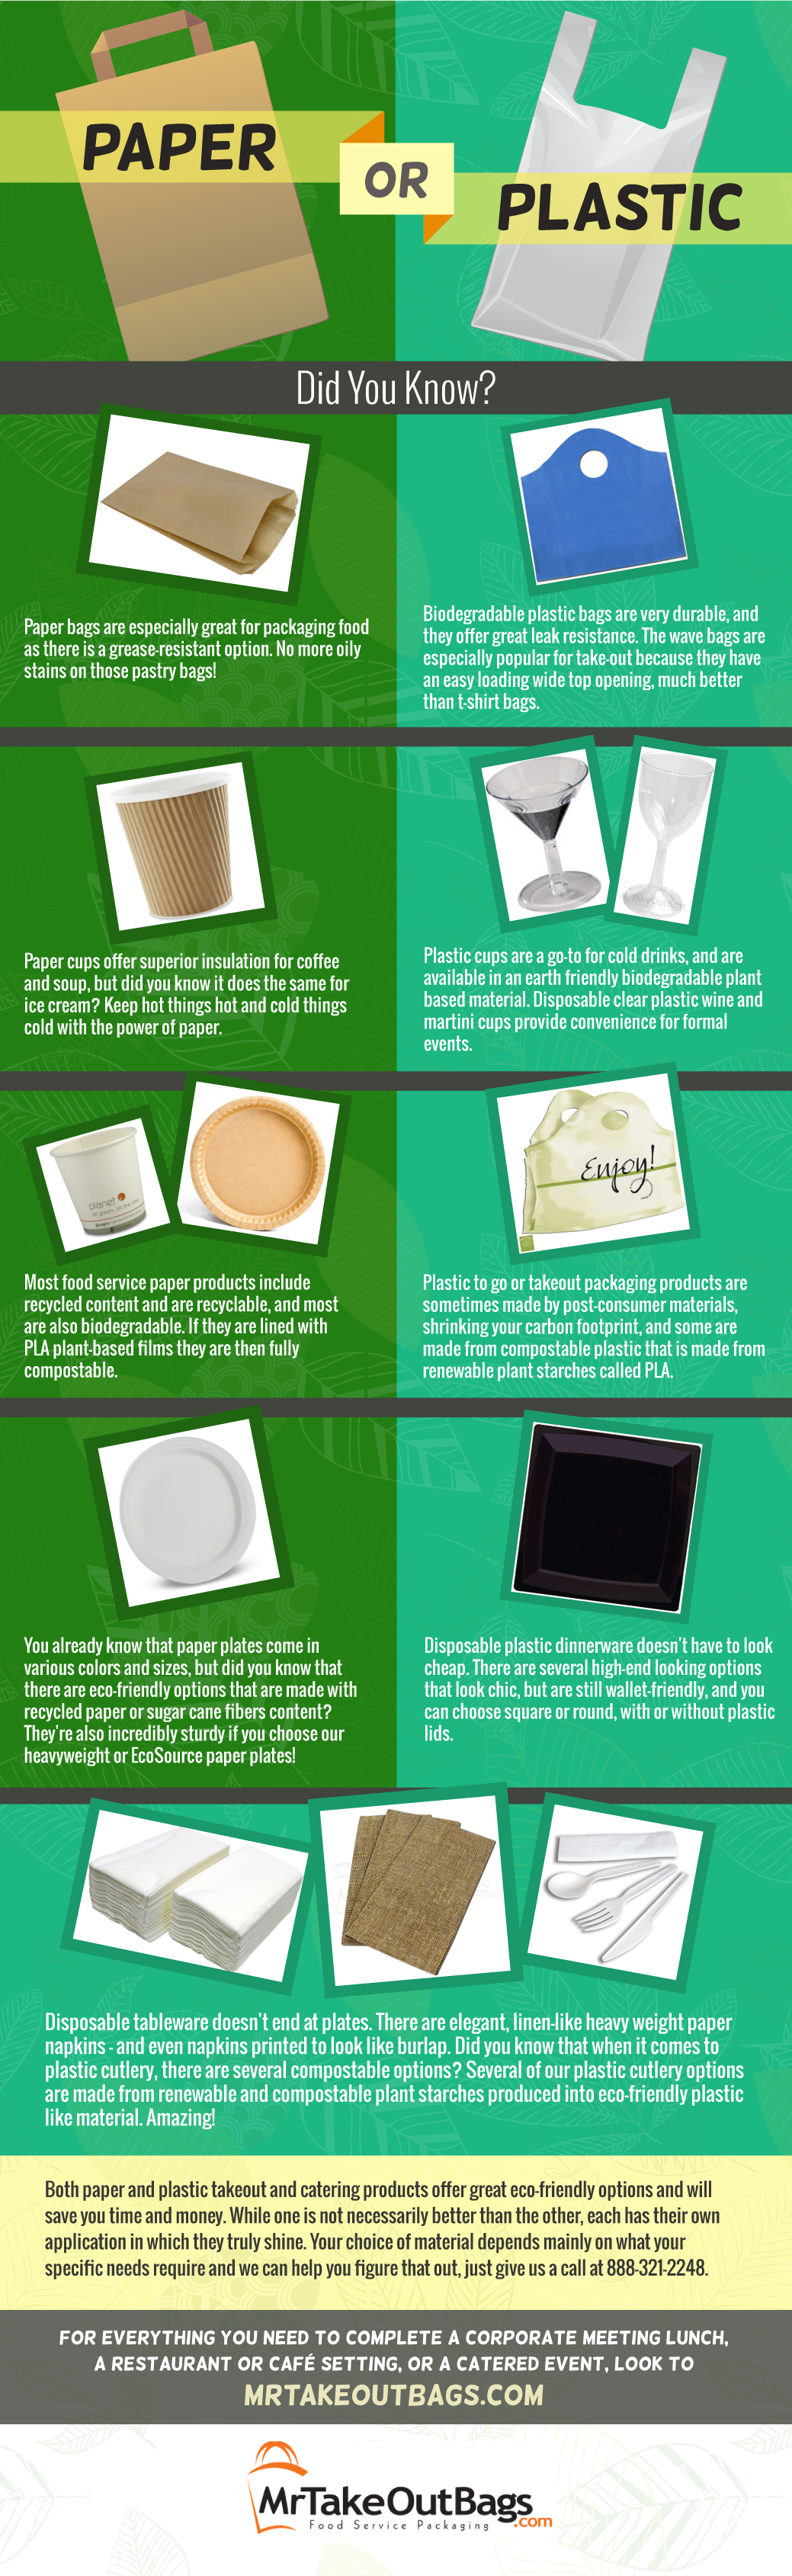 http://www.mrtakeoutbags.com/blog/wp-content/uploads/2016/02/mrtakeoutbags-plastic-paper-infographic-4.png